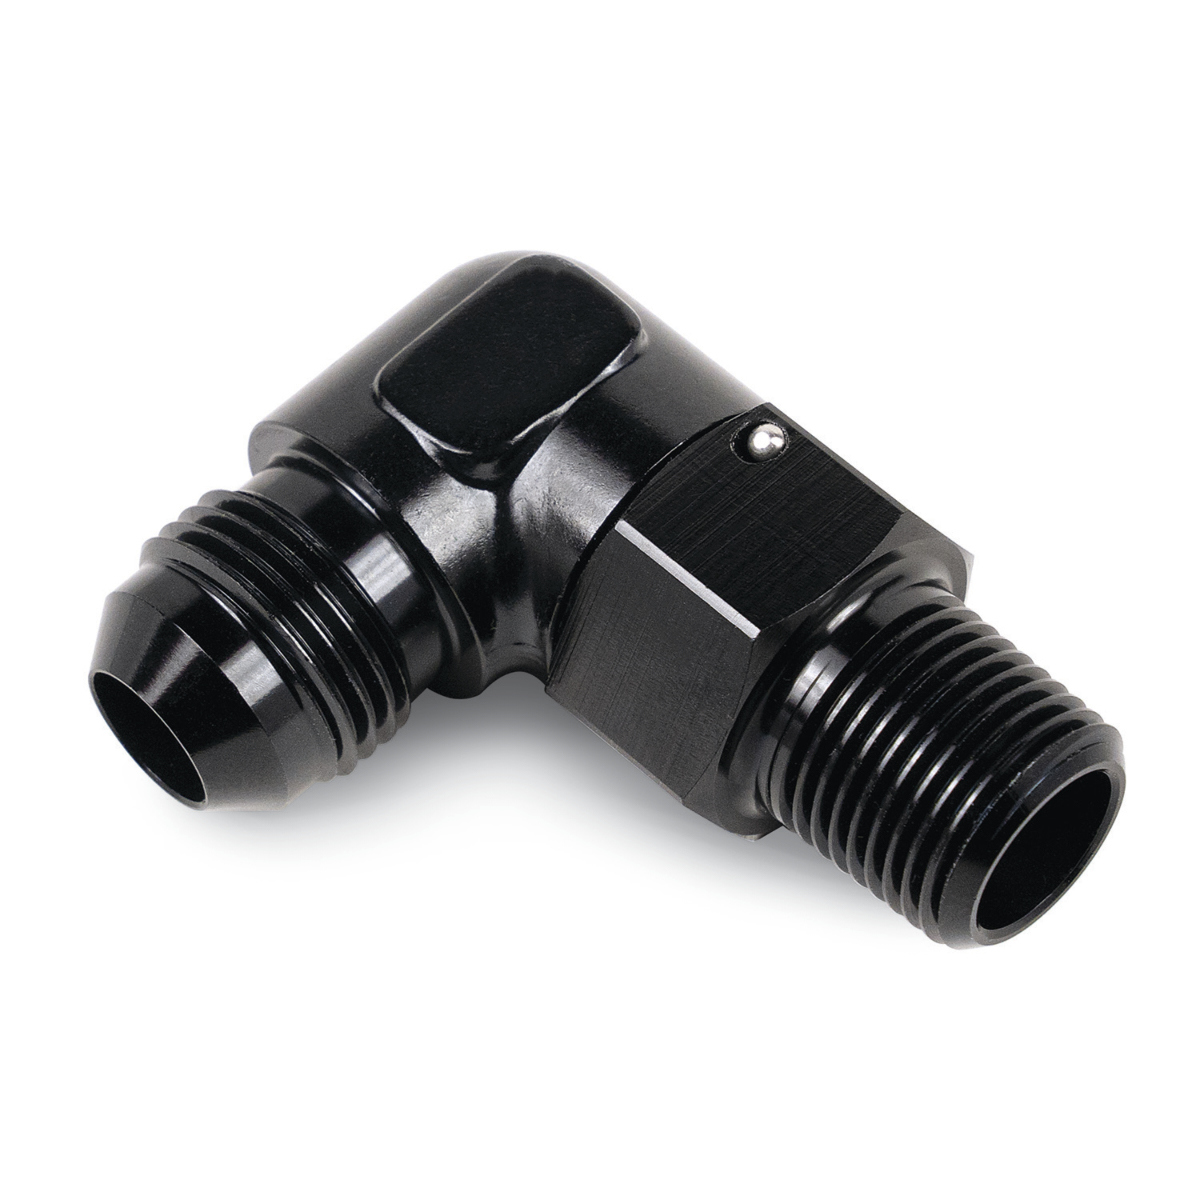 Derale 59606 Fitting, Adapter, 90 Degree, 3/8 in NPT Male to 6 AN Male, Aluminum, Black Anodized, Each